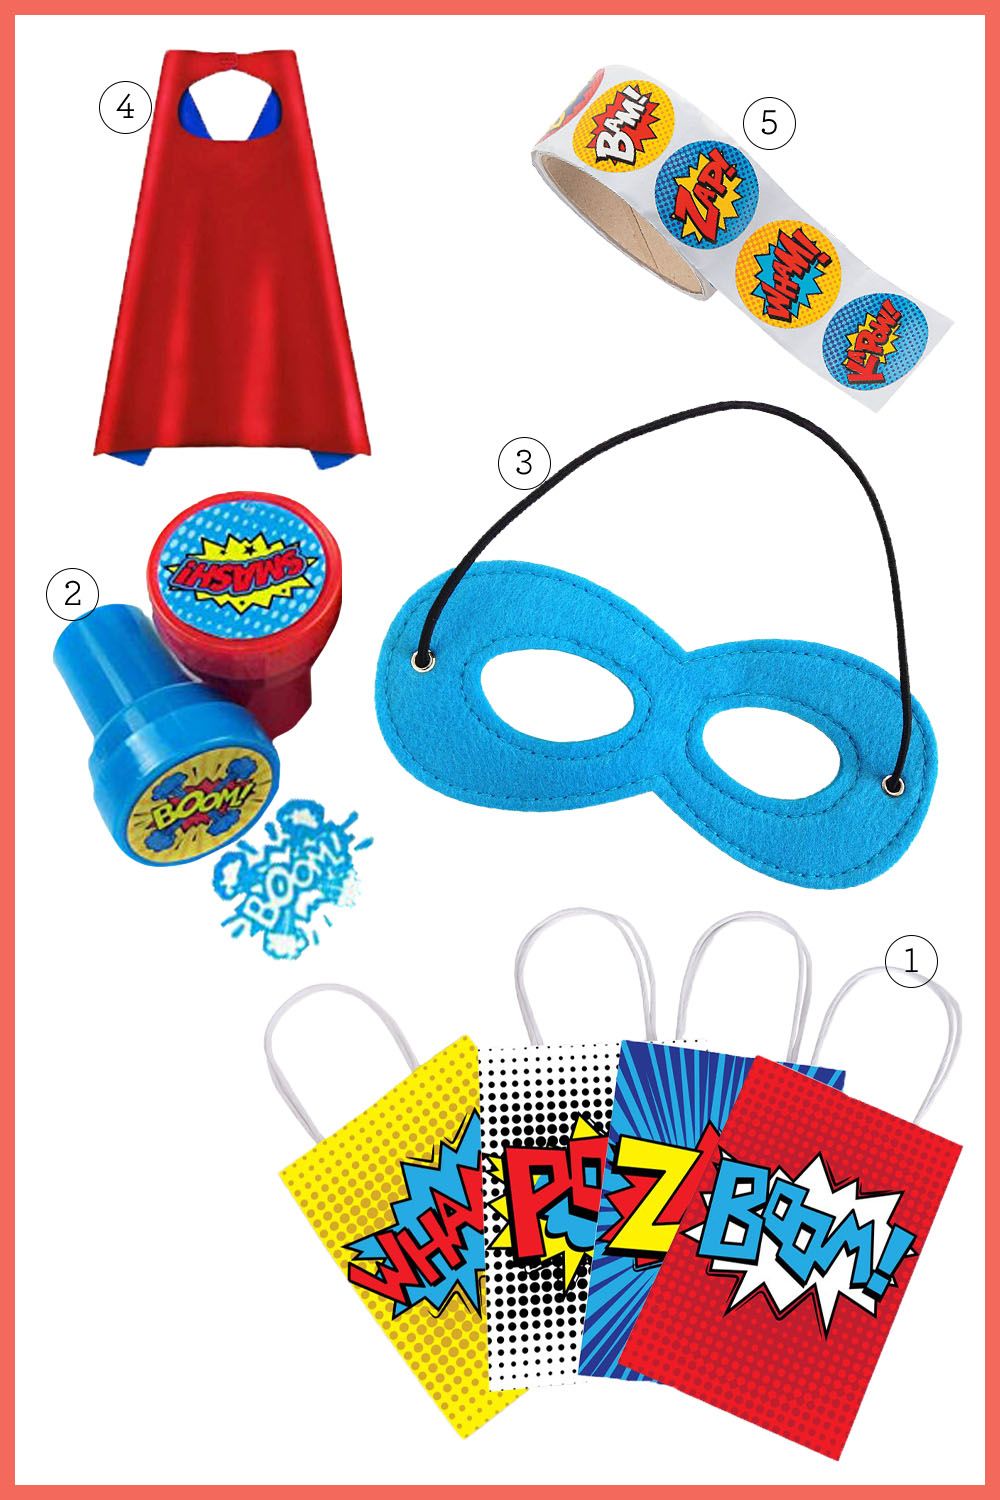 17 unique party goodie bag ideas your kids will absolutely love